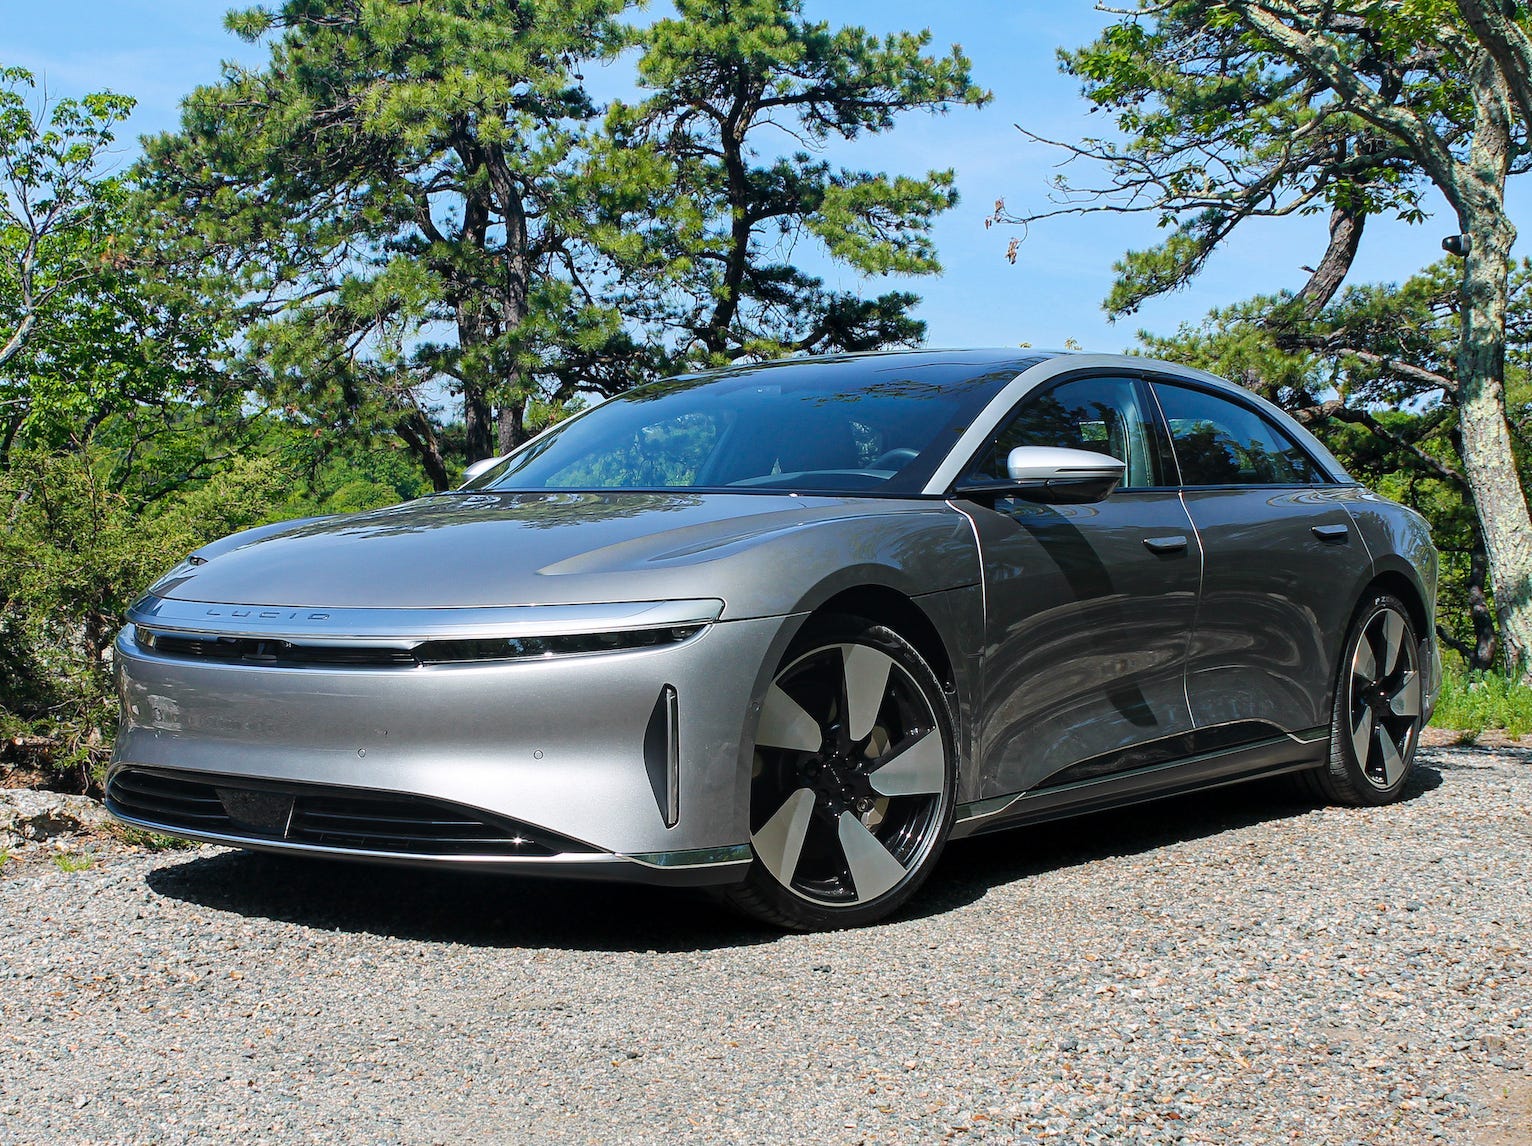 A silver Lucid Air Grand Touring Performance electric car in a driveway, with trees and blue sky in the background.